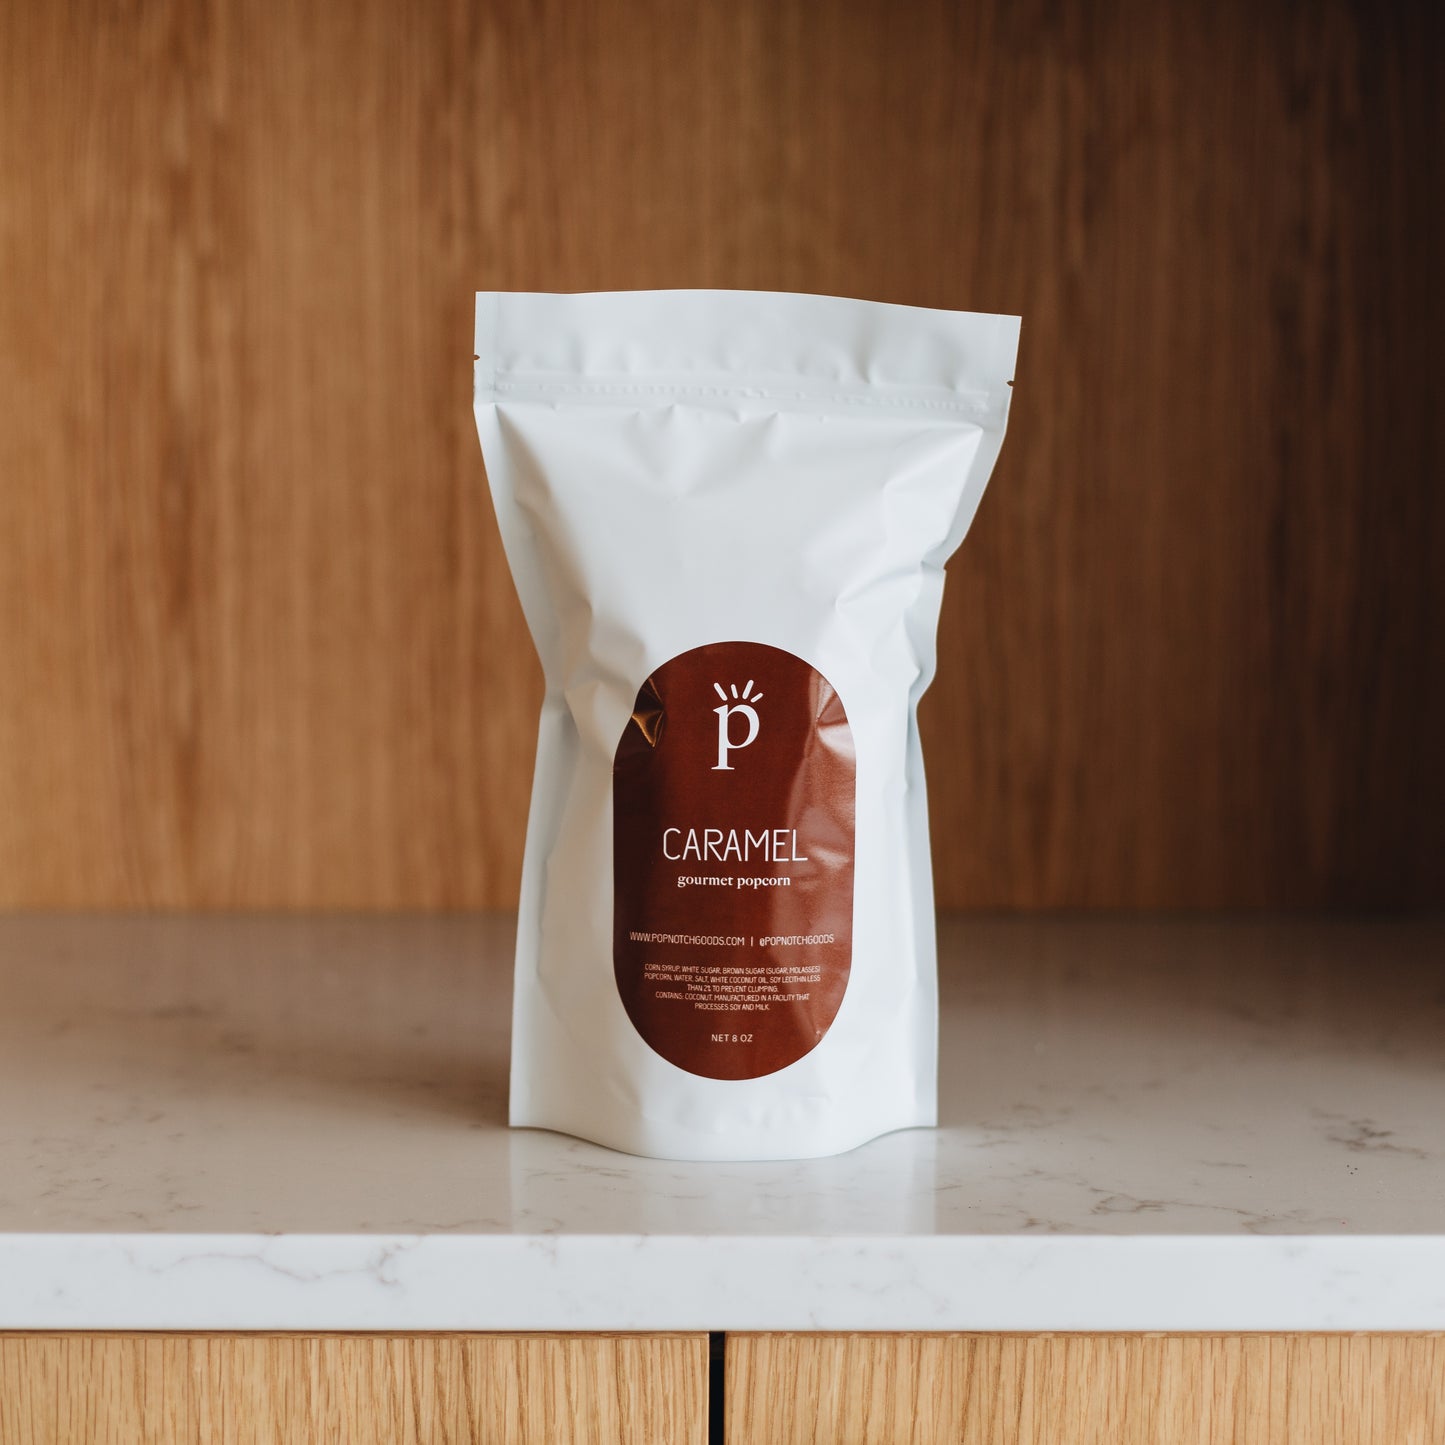 Sweet, Crunchy, and buttery caramel popcorn is the perfect snack to have around the house. Order it now online or stop in our shop to get a bag of this classic gourmet popcorn. Featured is our Large bag of Caramel Popcorn (8oz)